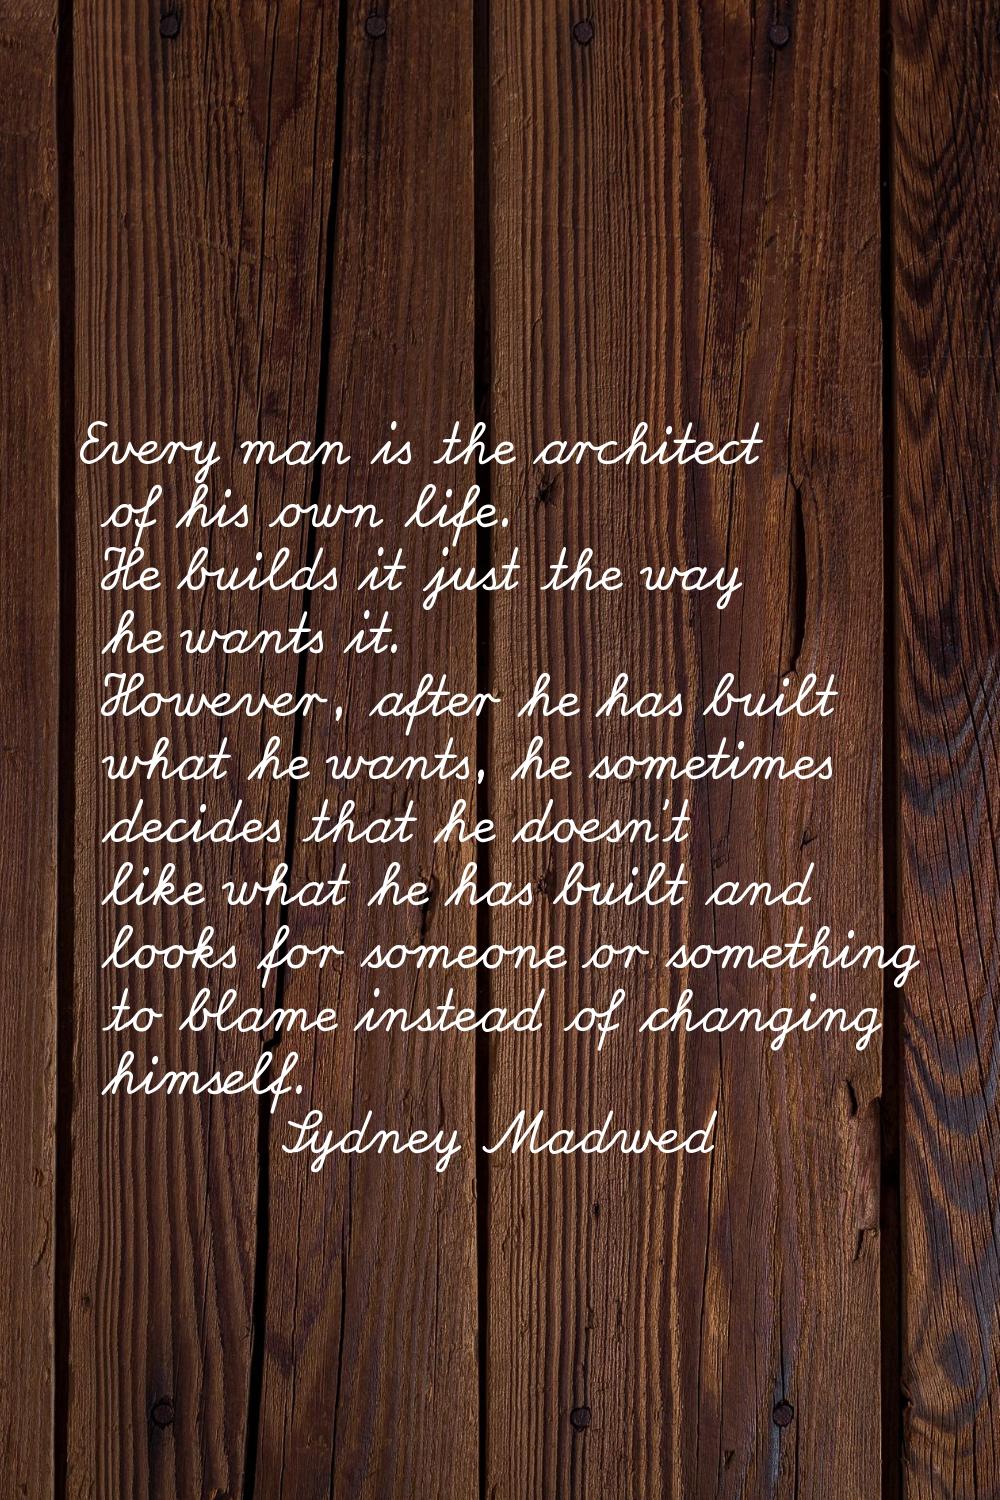 Every man is the architect of his own life. He builds it just the way he wants it. However, after h